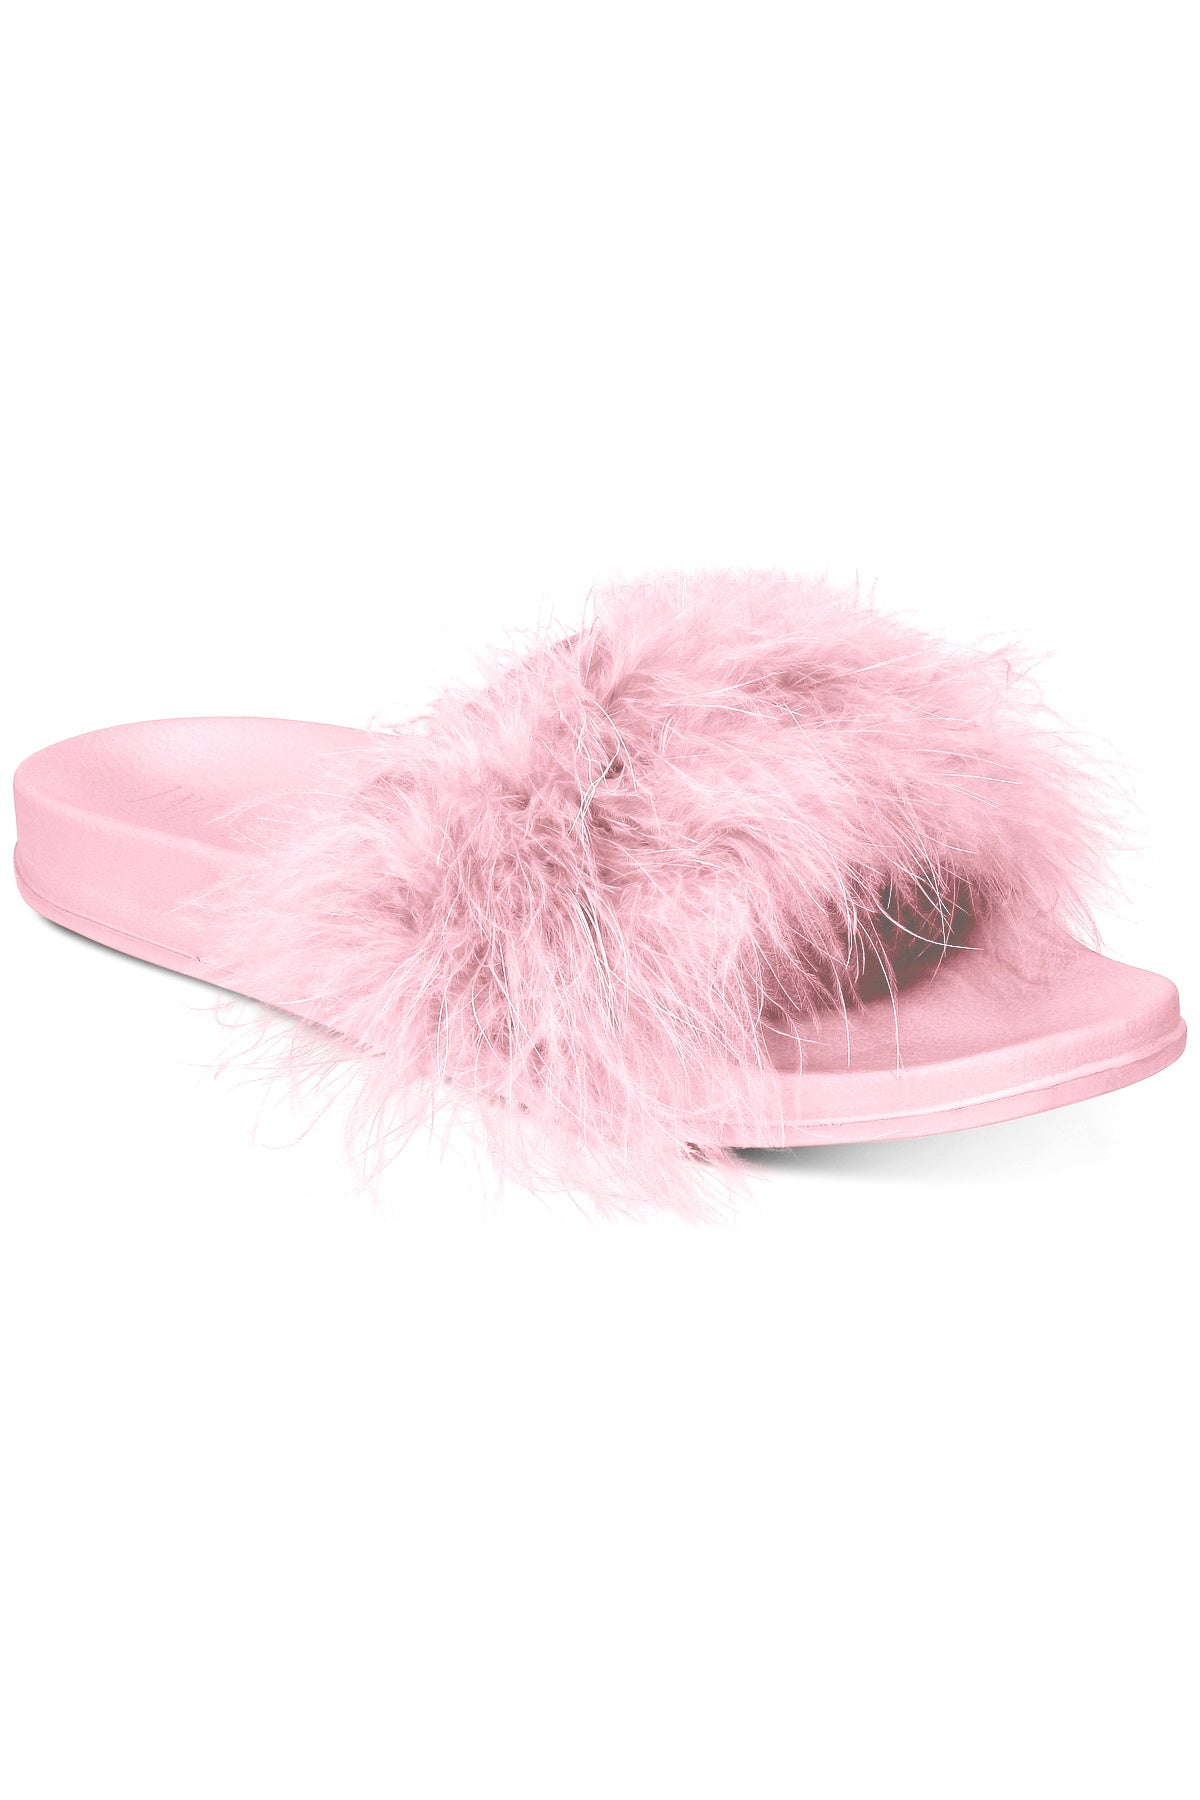 INC International Concepts Faux Marabou Slide Slippers in Cradle Pink